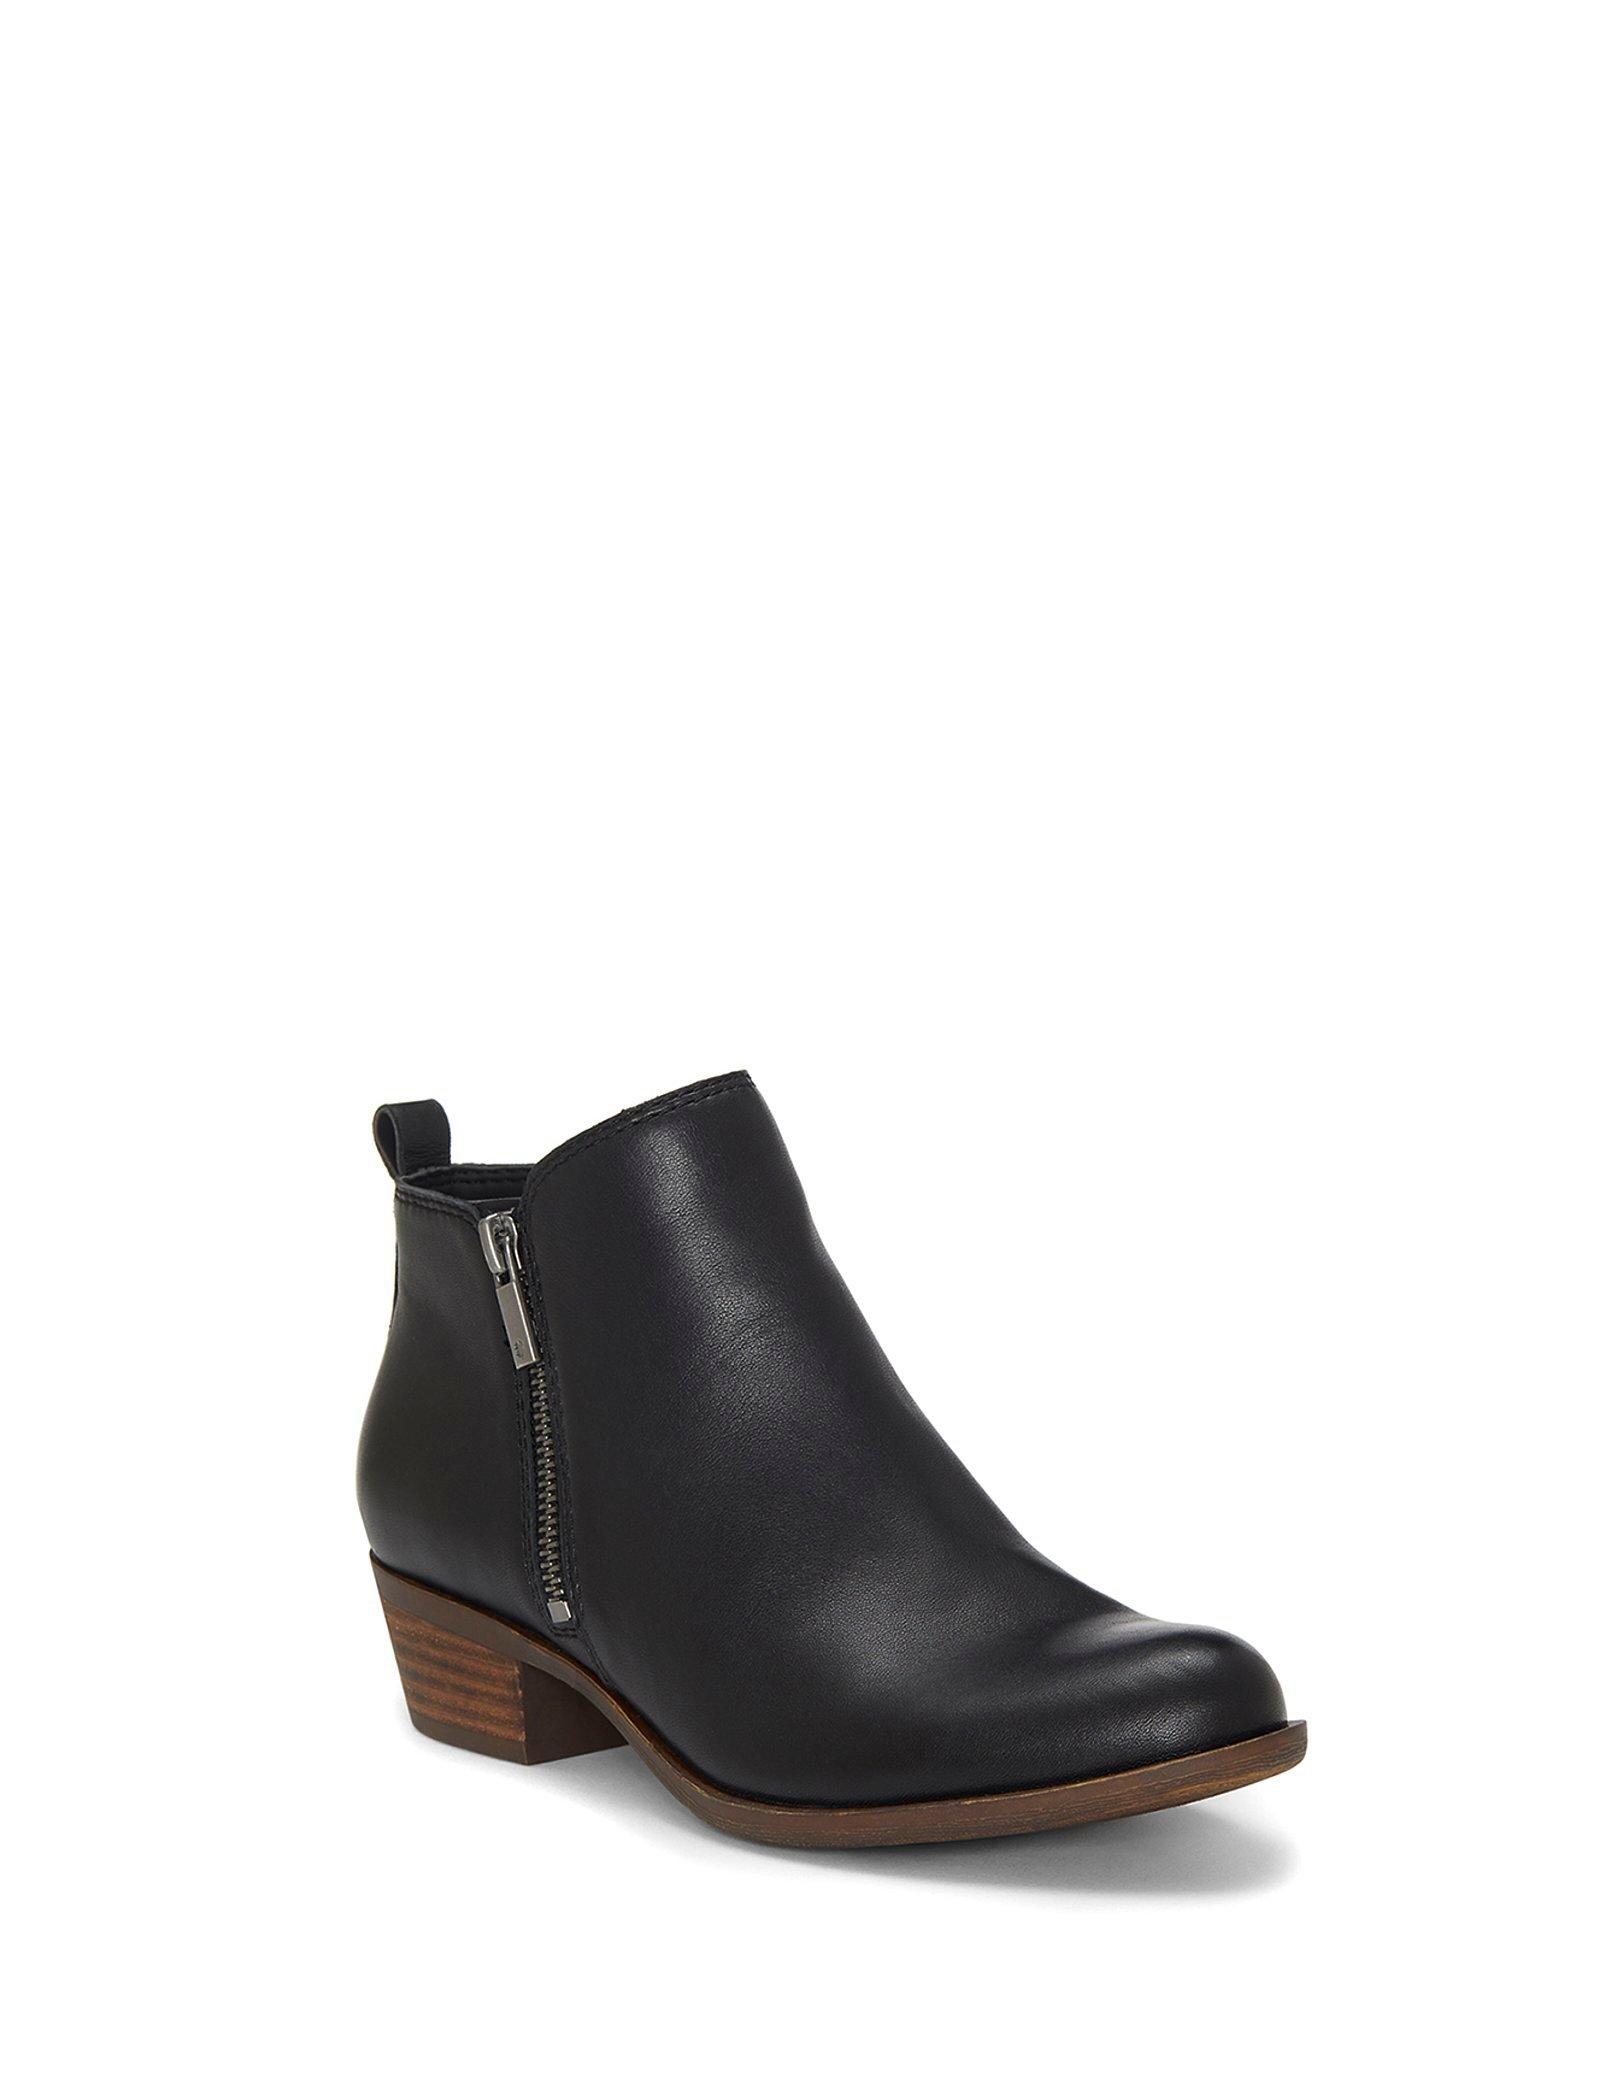 BASEL LEATHER FLAT BOOTIE | Lucky Brand